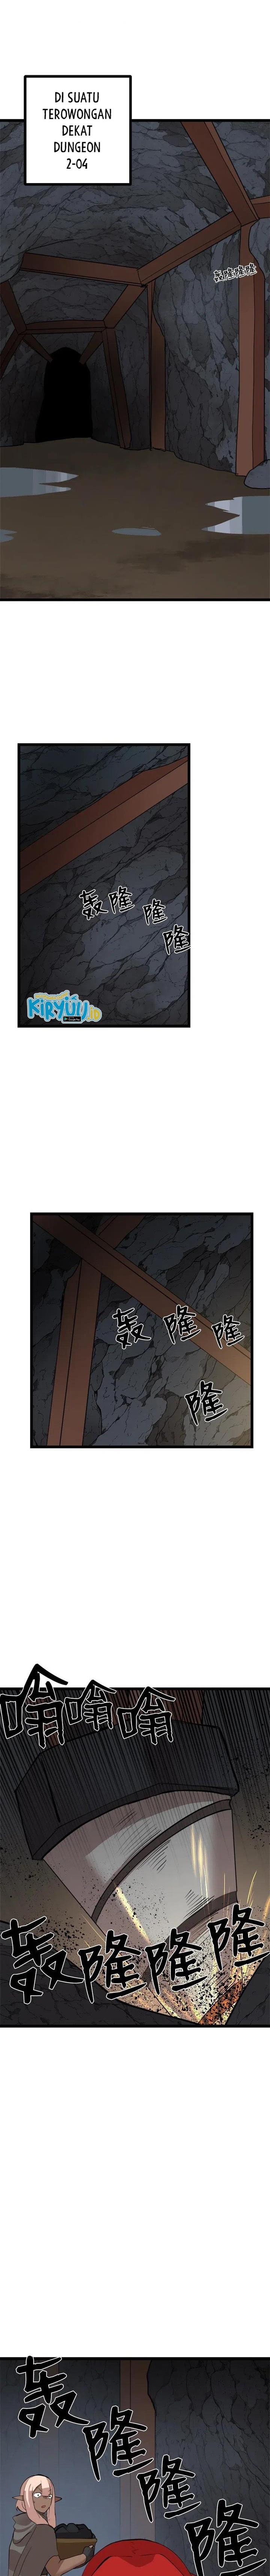 The Dungeon Master Chapter 96